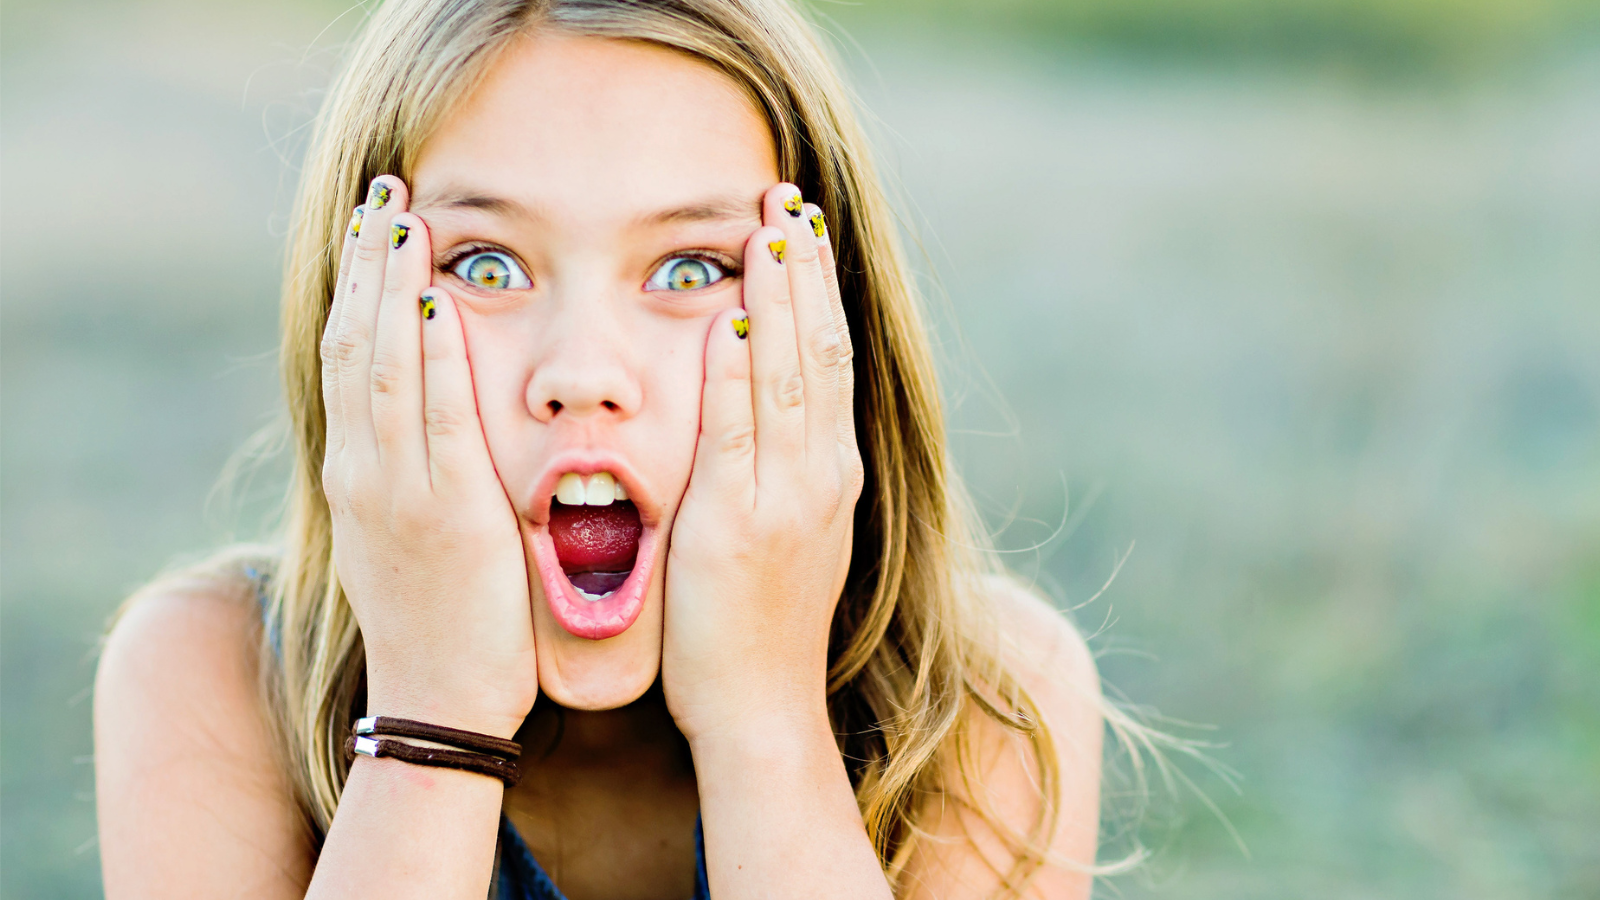 Tween girl with her hands on her face and mouth opened in shock